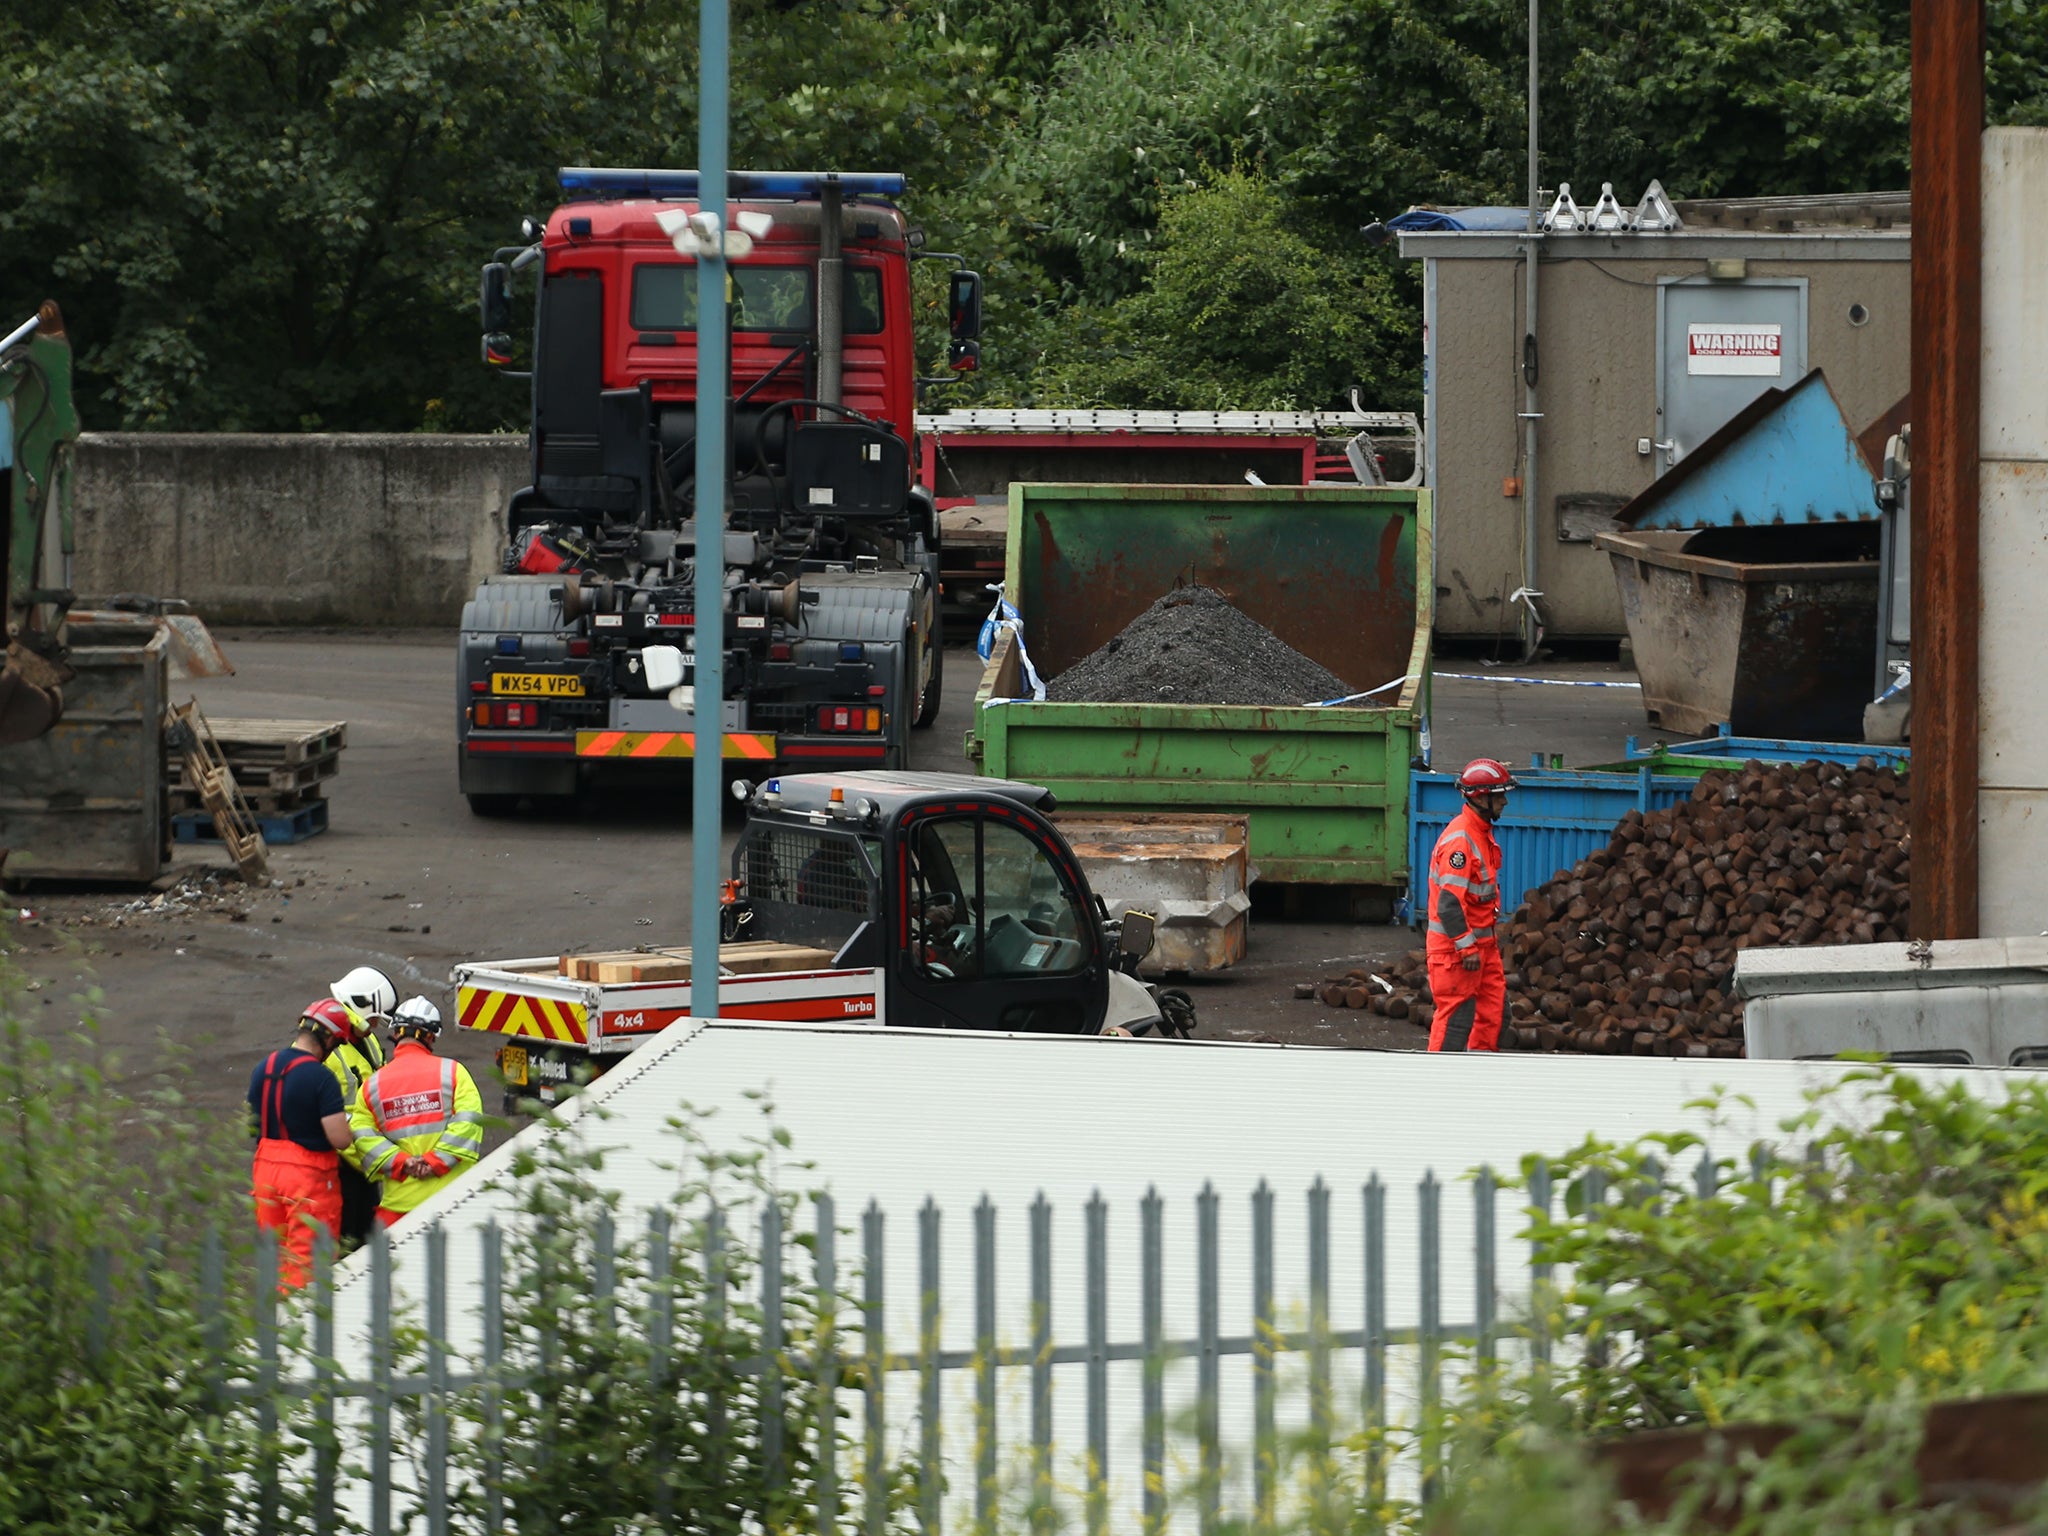 Public donations have rolled in since the tragedy at the Hawkeswood Metal recycling plant